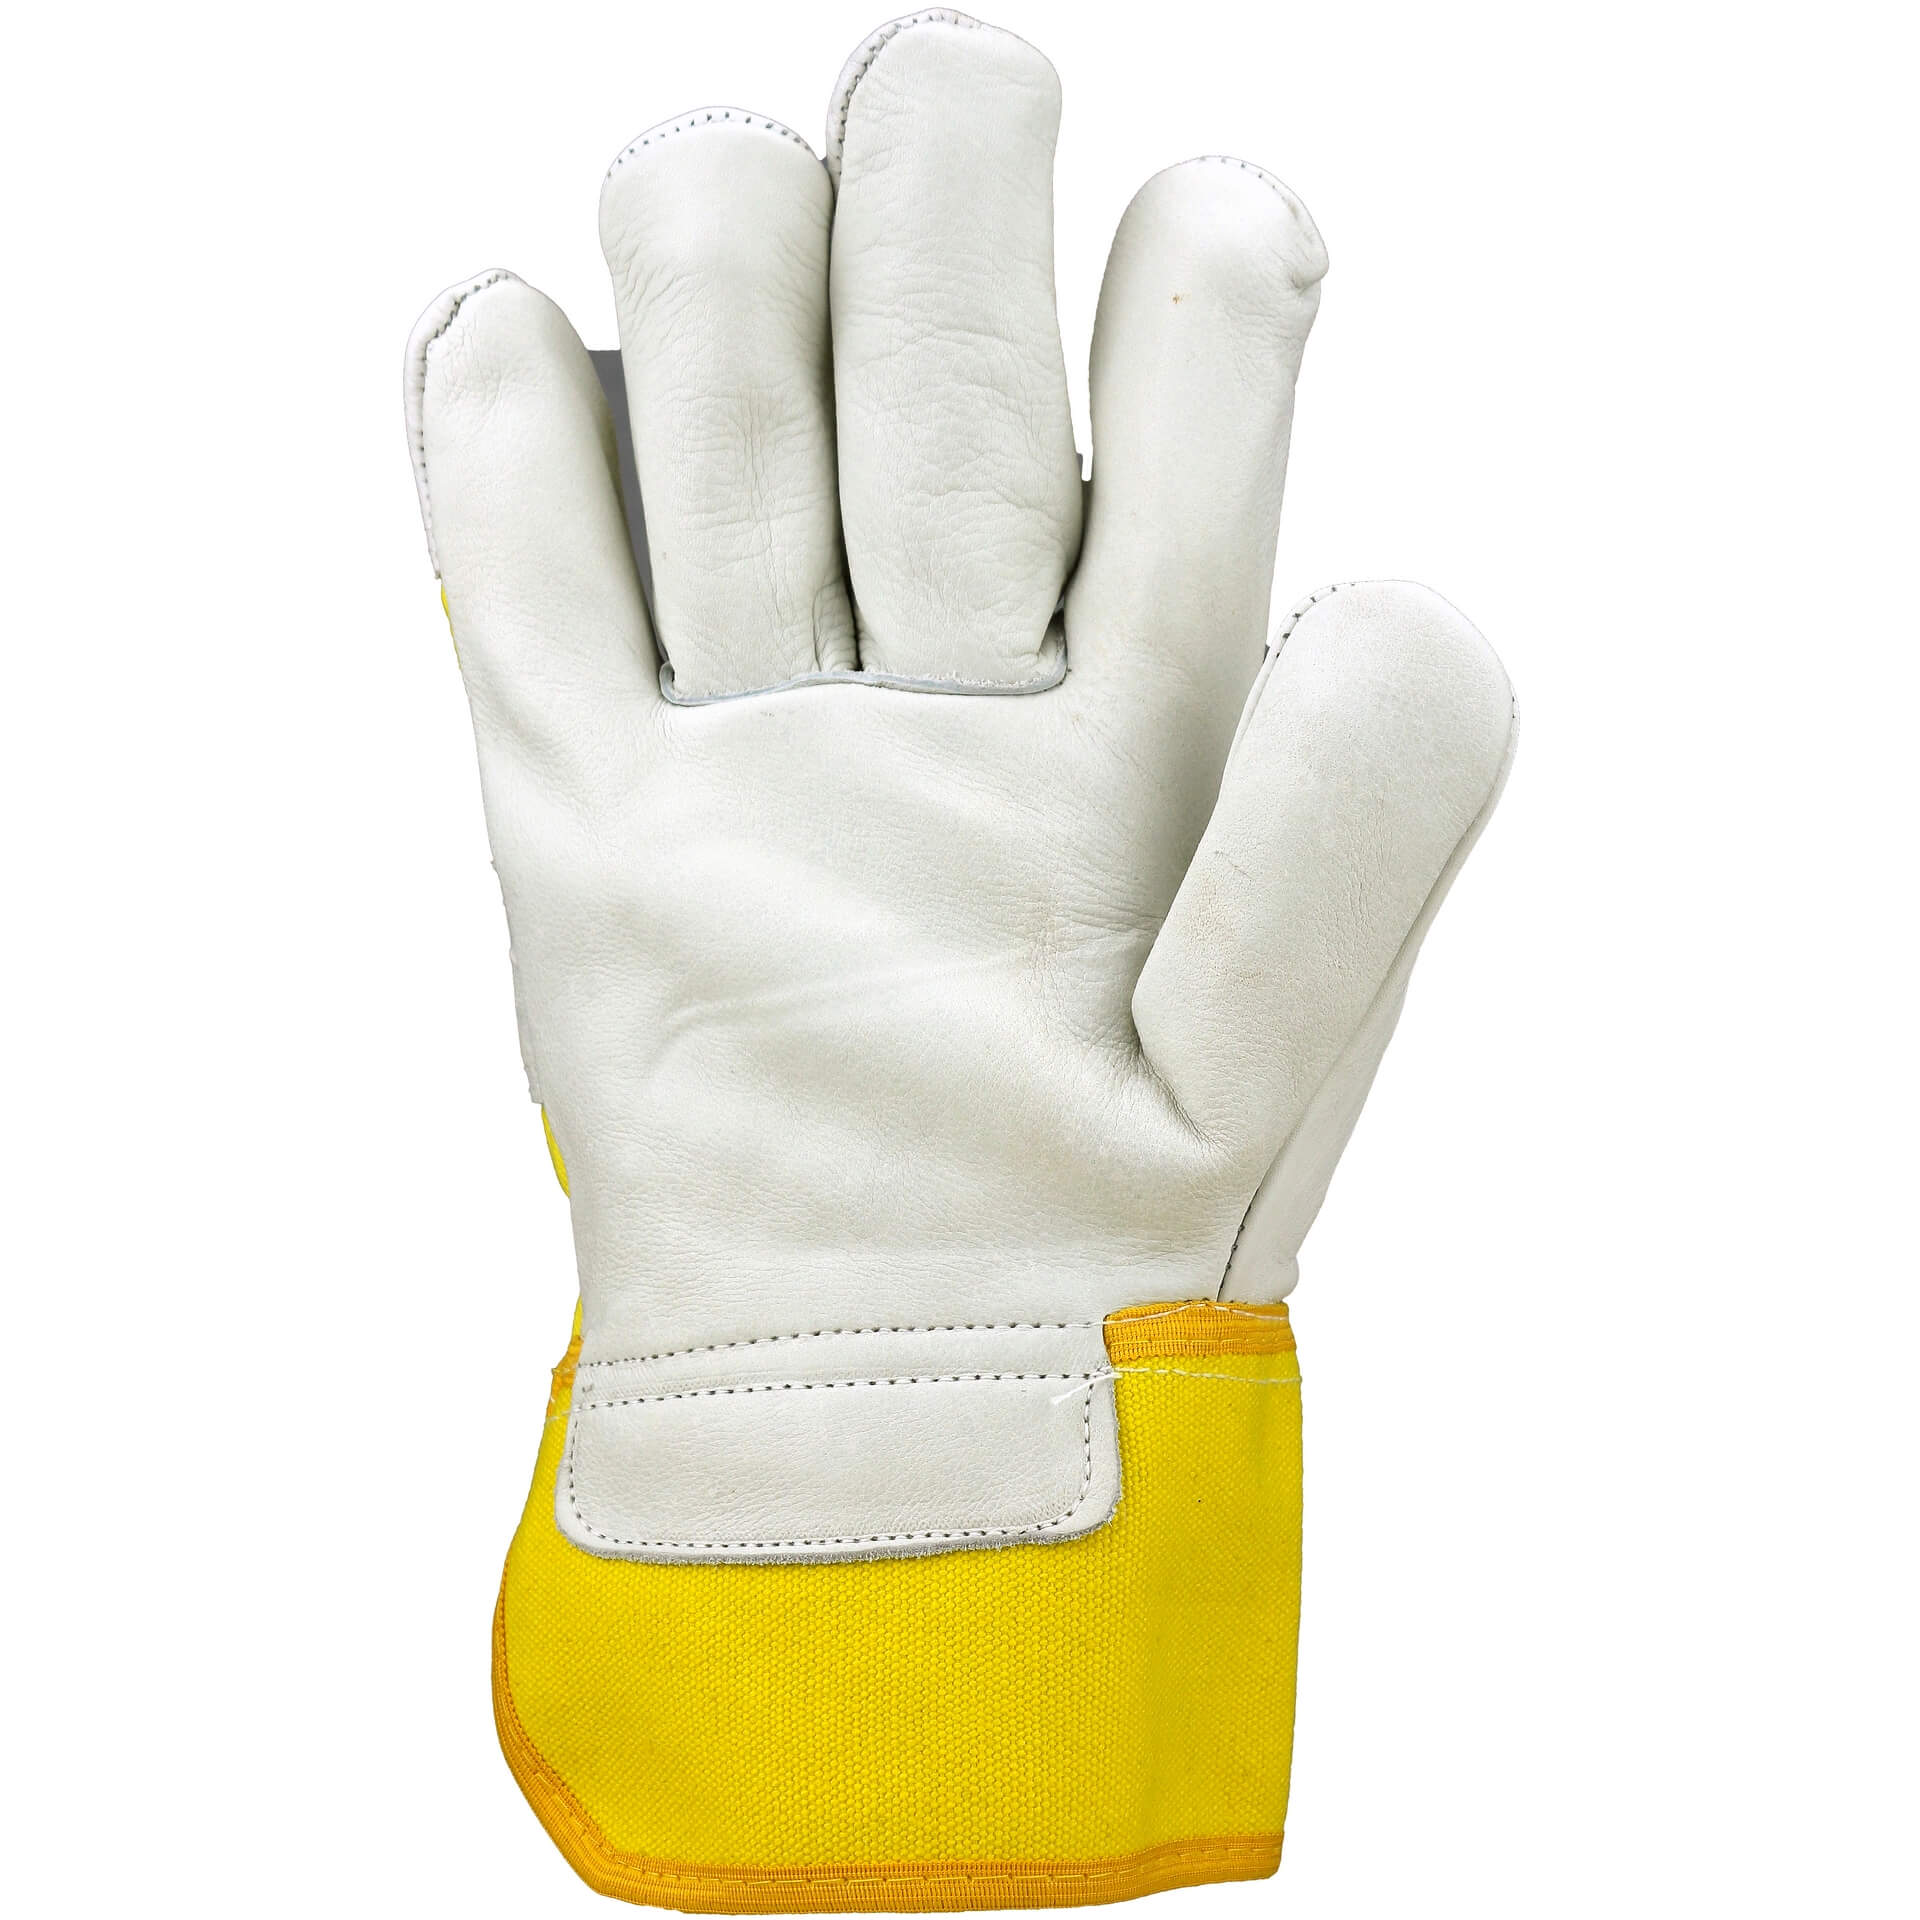 Product image Cow grain leather glove ADLER-TOP12